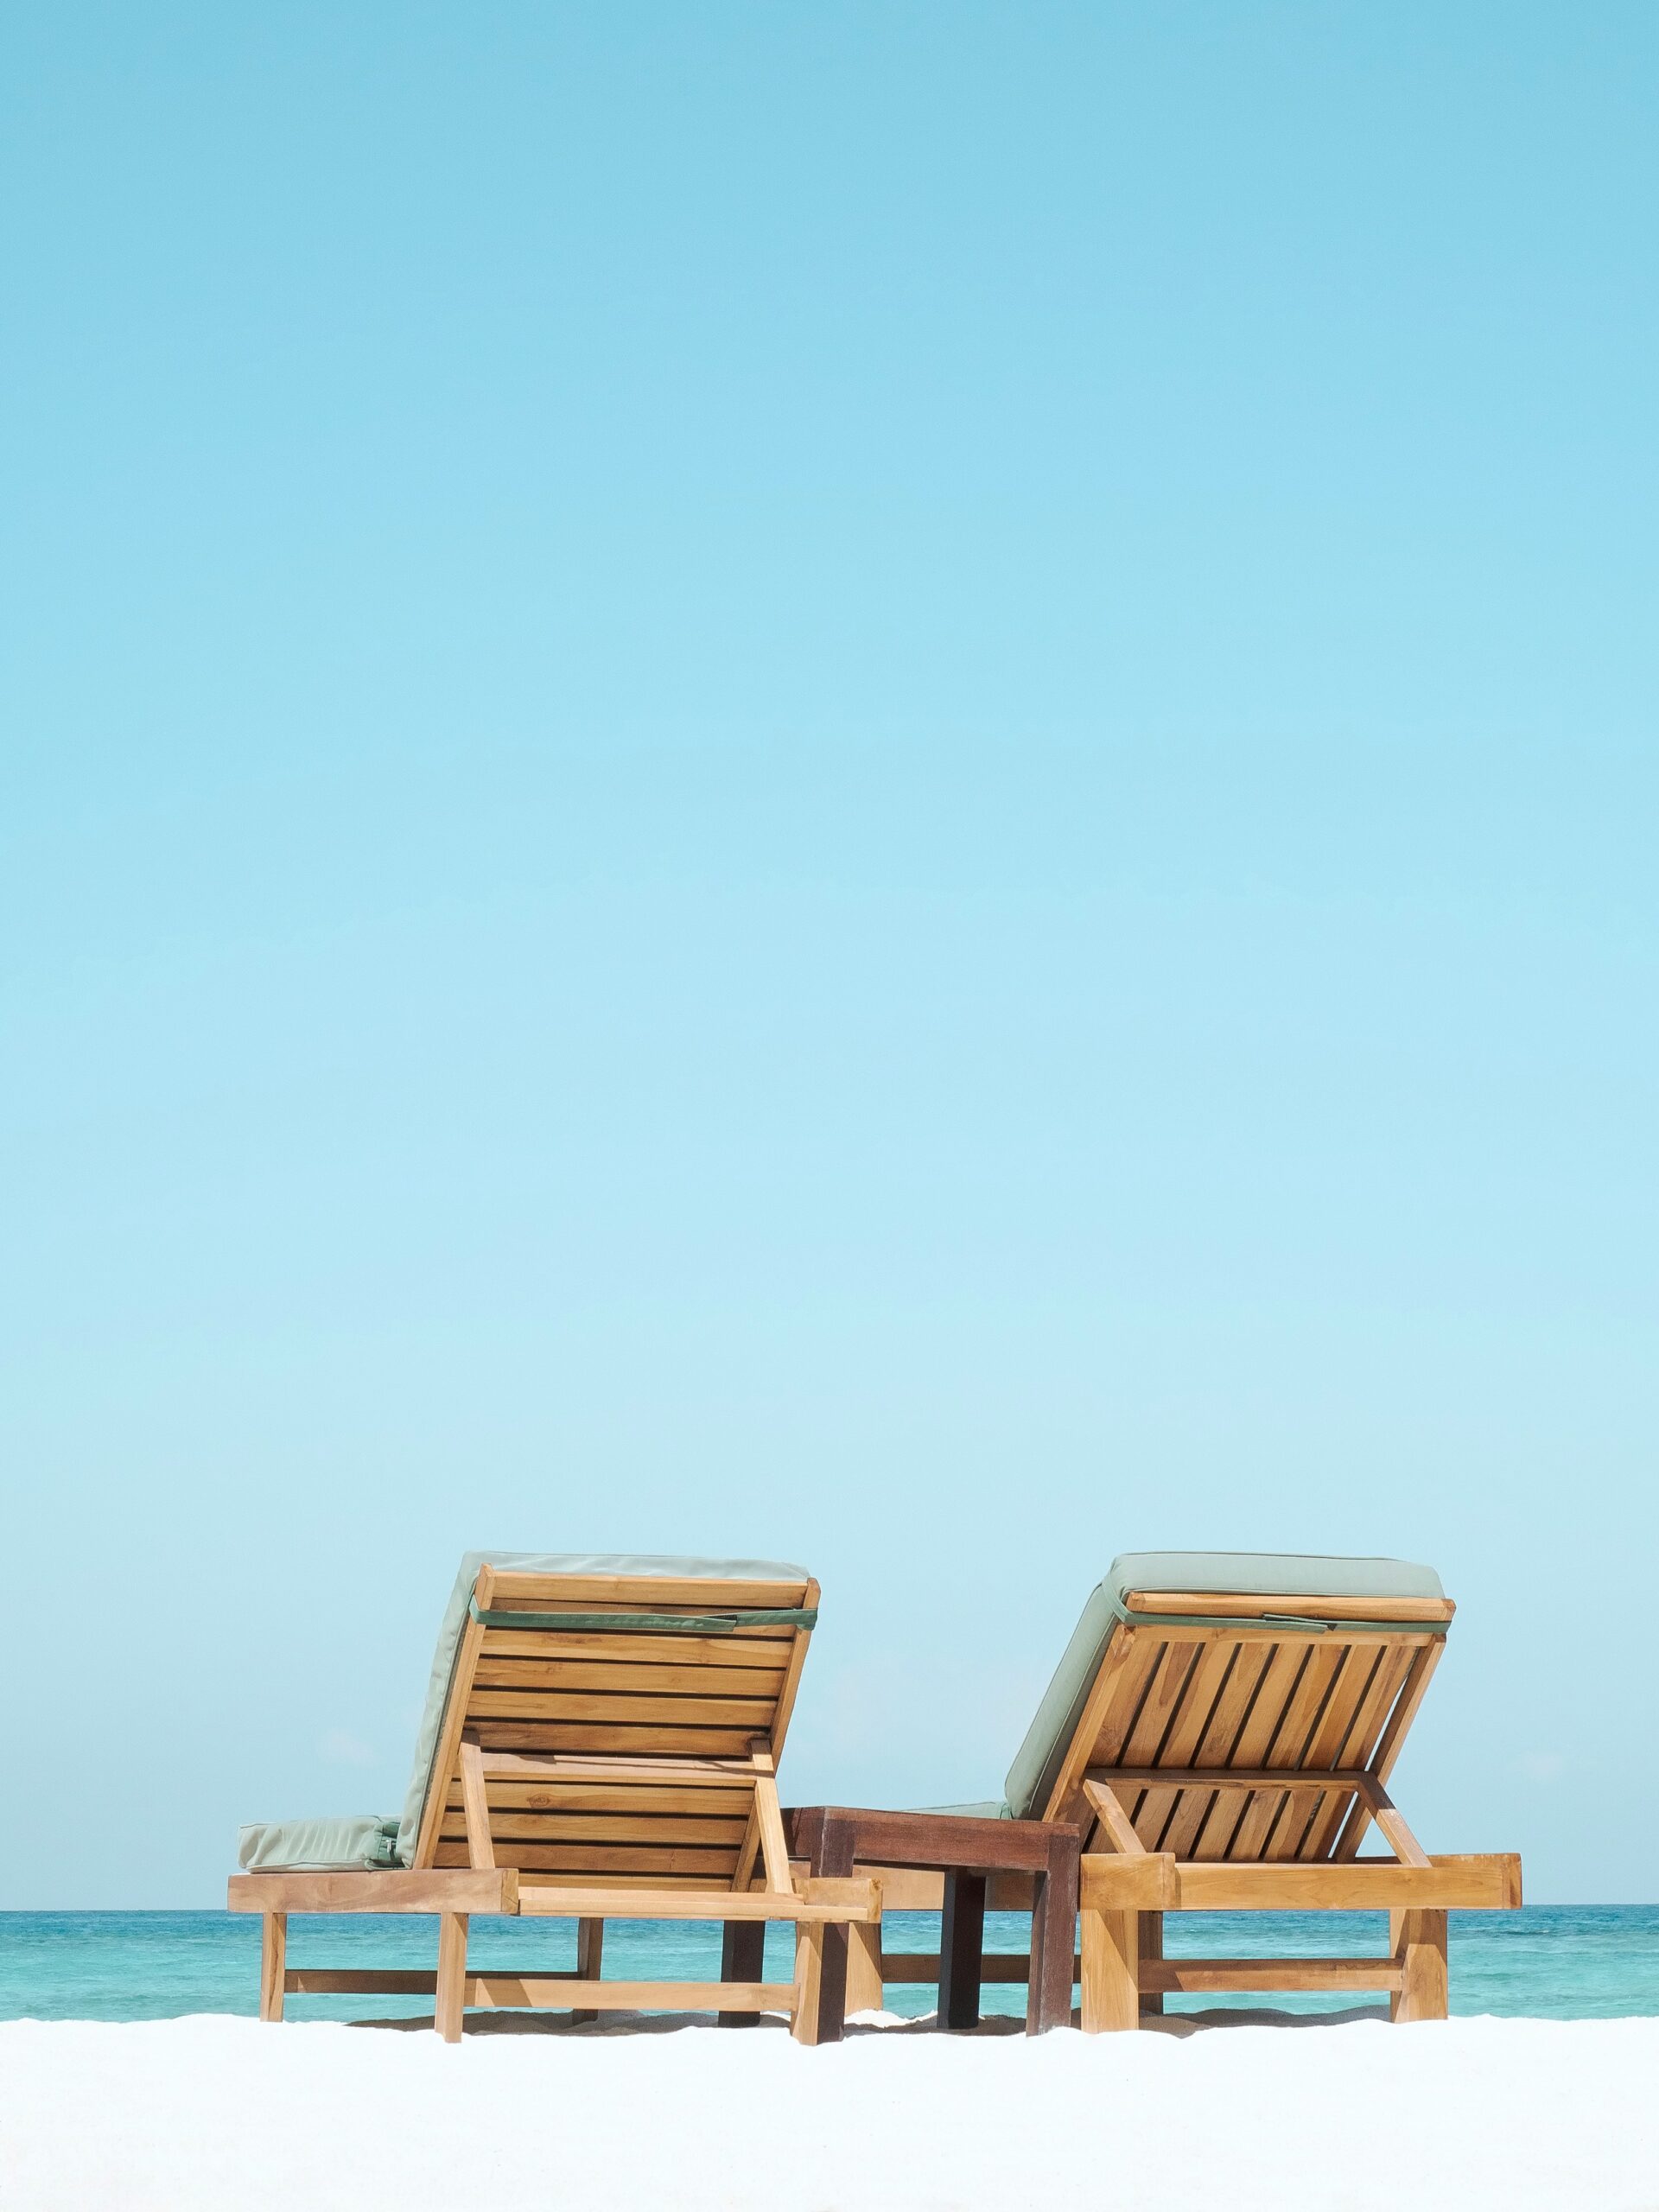 Two beach chairs next to the ocean